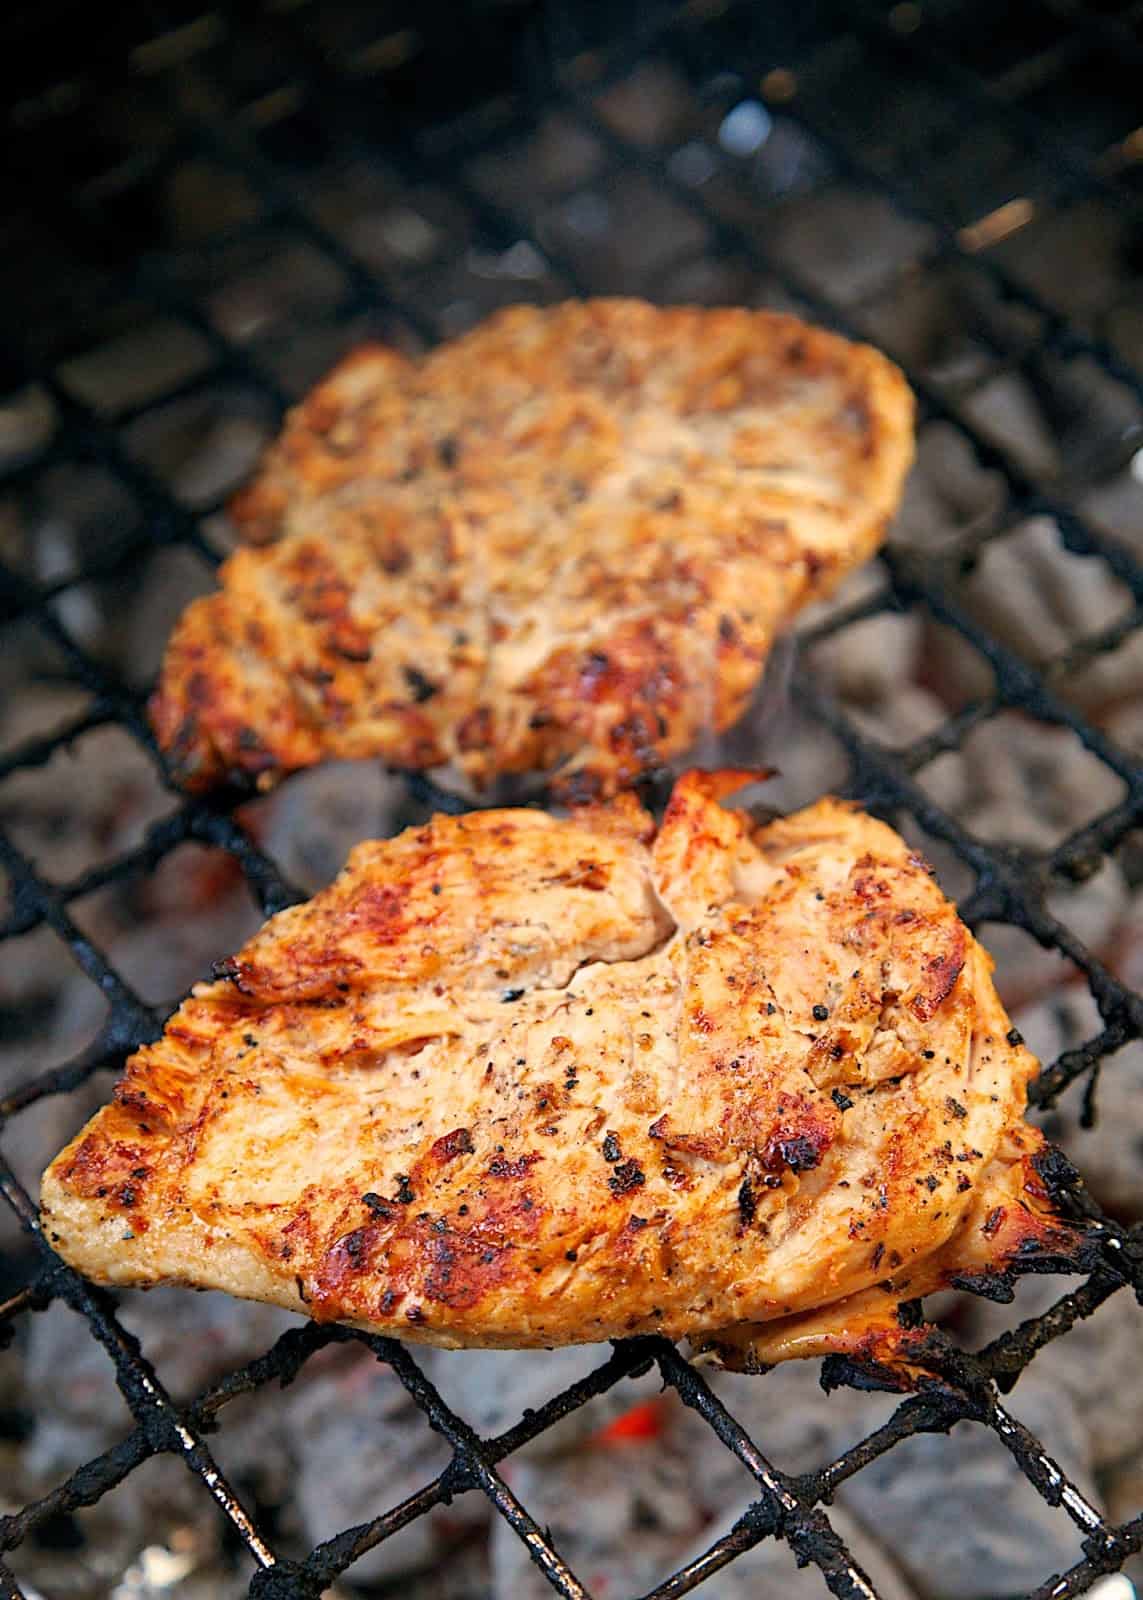 Cajun Caesar Grilled Chicken Recipe - 3 ingredient marinade! Caesar dressing, cajun seasoning and lemon juice. SO simple and super delicious! Whisk up marinade in the morning and let the chicken hang out in the fridge all day. Grill up for a quick and delicious dinner.